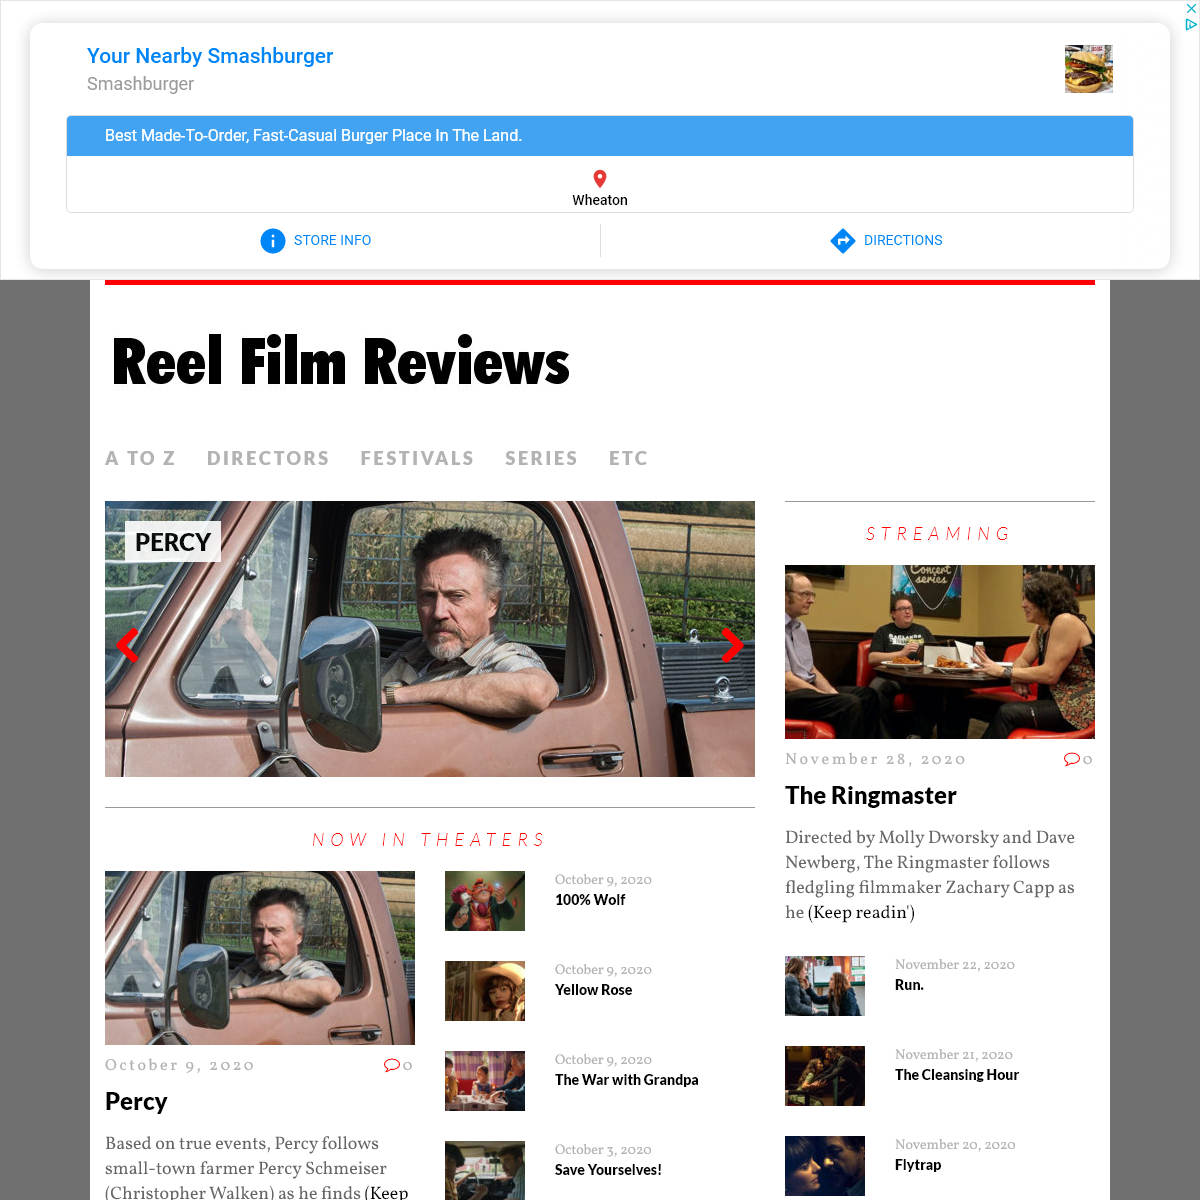 A complete backup of reelfilm.com